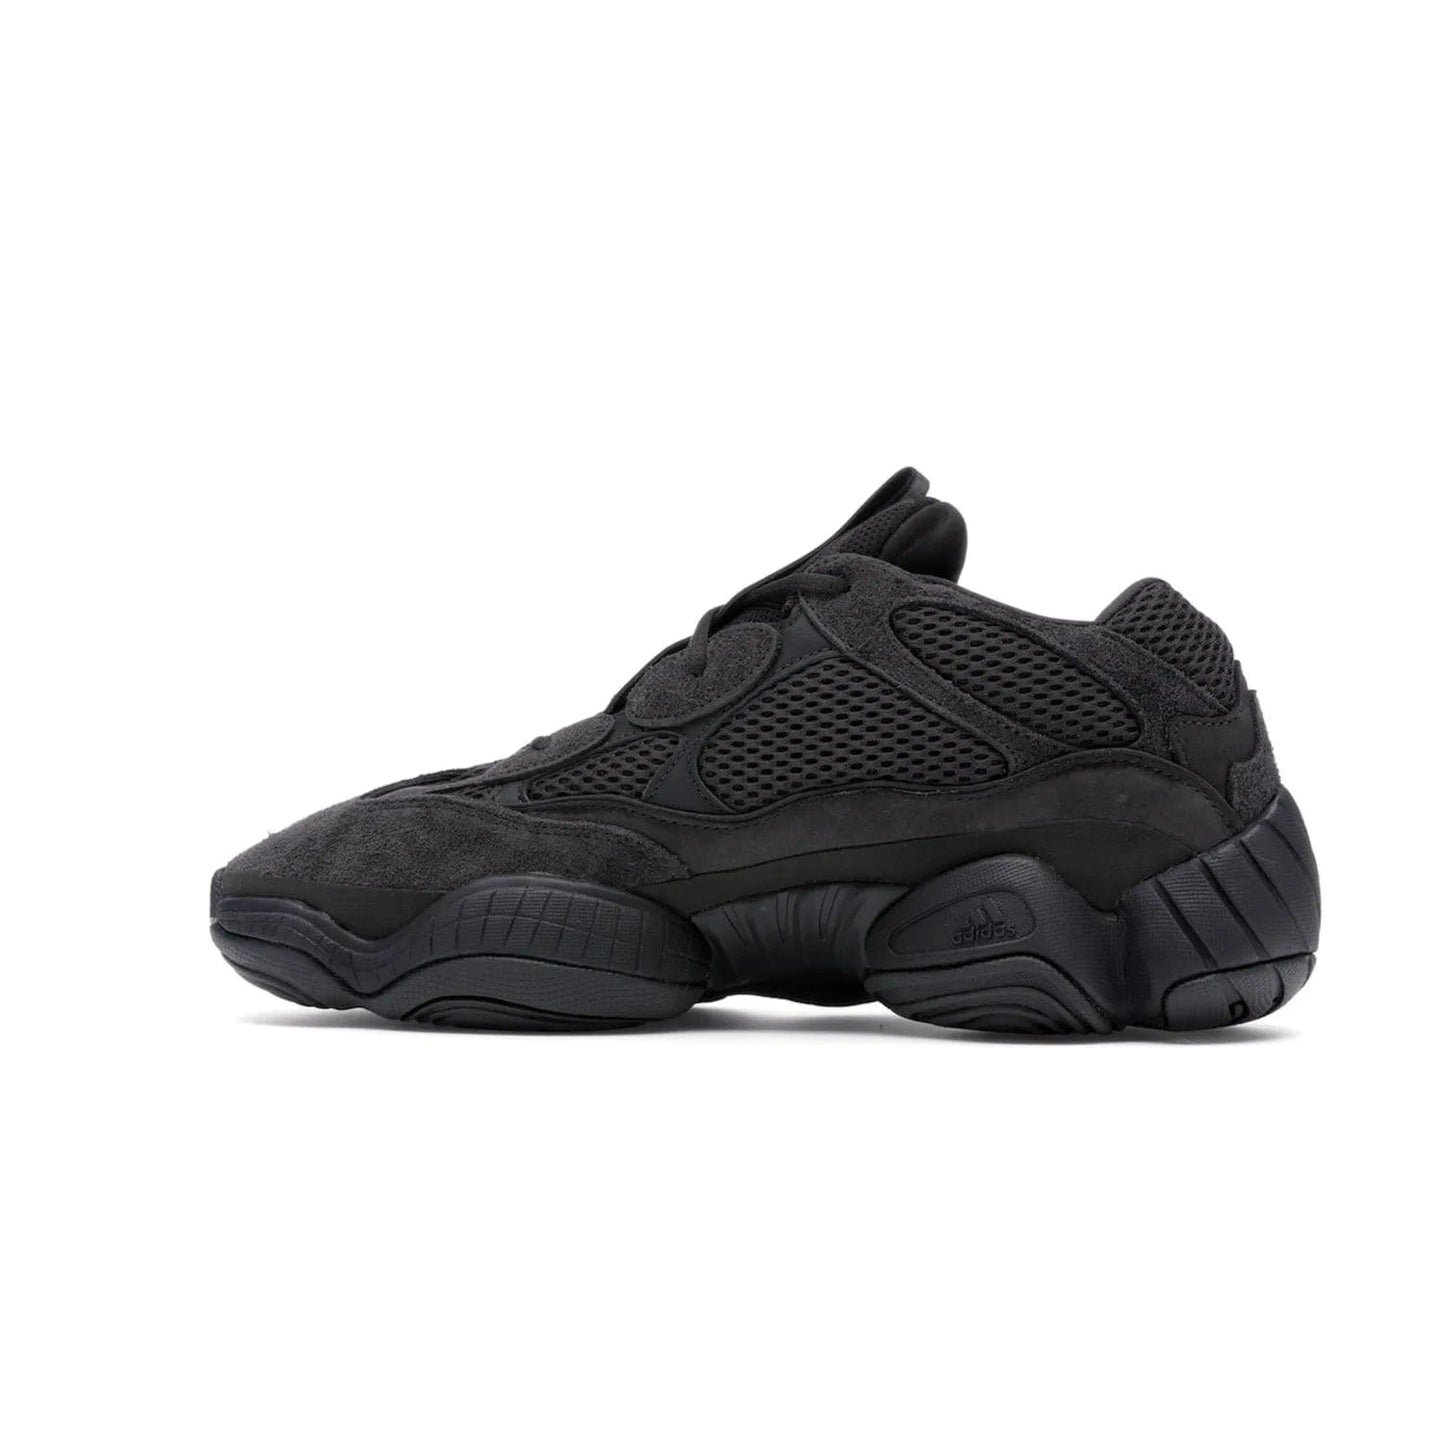 adidas Yeezy 500 Utility Black - Image 21 - Only at www.BallersClubKickz.com - Iconic adidas Yeezy 500 Utility Black in All-Black colorway. Durable black mesh and suede upper with adiPRENE® sole delivers comfort and support. Be unstoppable with the Yeezy 500 Utility Black. Released July 2018.